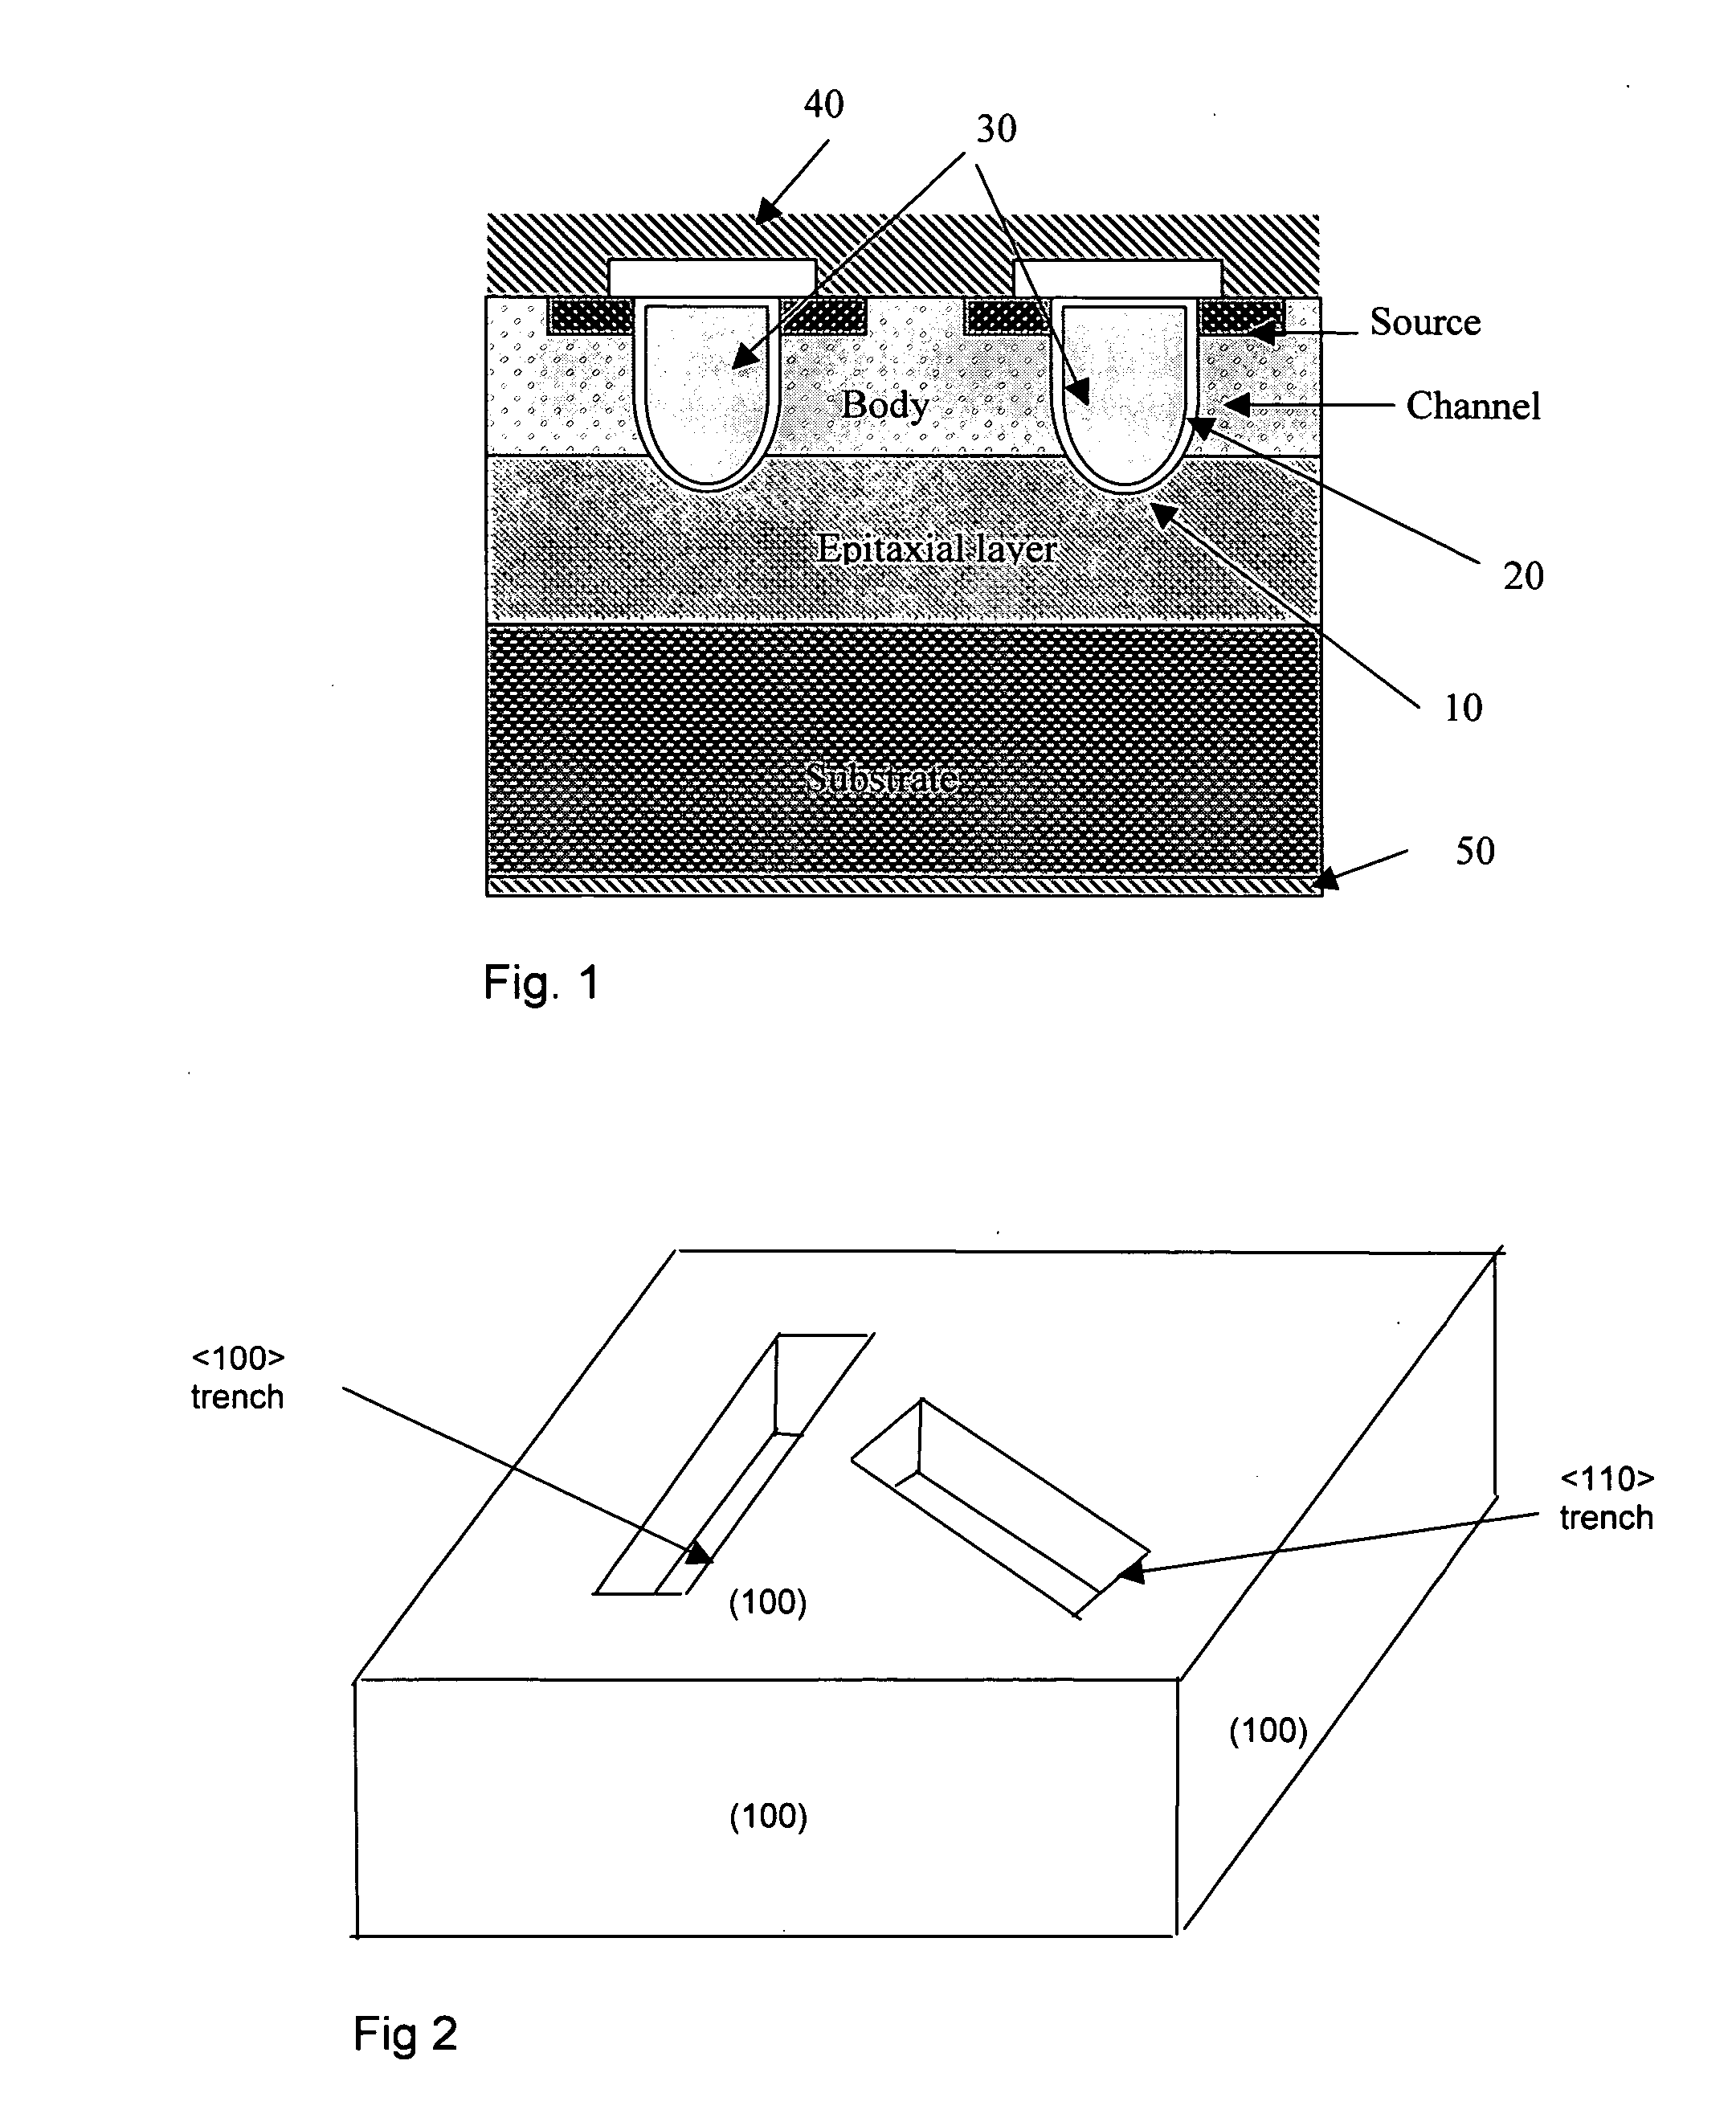 Trenched MOSFETS with part of the device formed on a (110) crystal plane